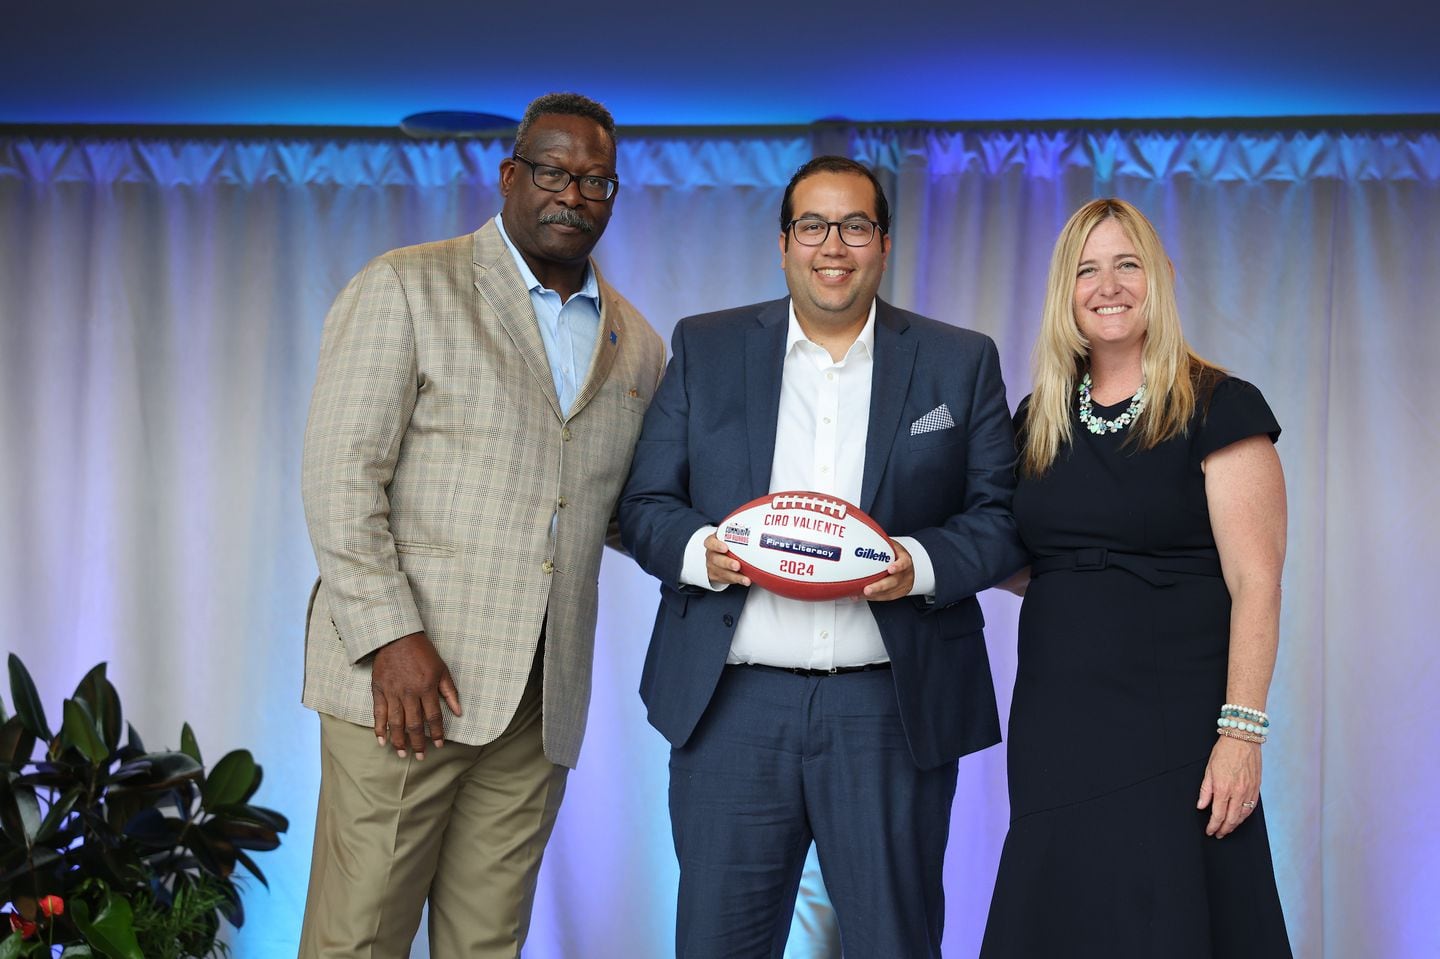 Patriots Pro Football Hall of Famer Andre Tippett (left) and Gillette’s Vice President of Communications & Community
Affairs, Global Grooming, Kara Buckley (right), congratulate Ciro Valiente from First Literacy of Boston for being selected as a
2024 Myra Kraft Community MVP Award winner.